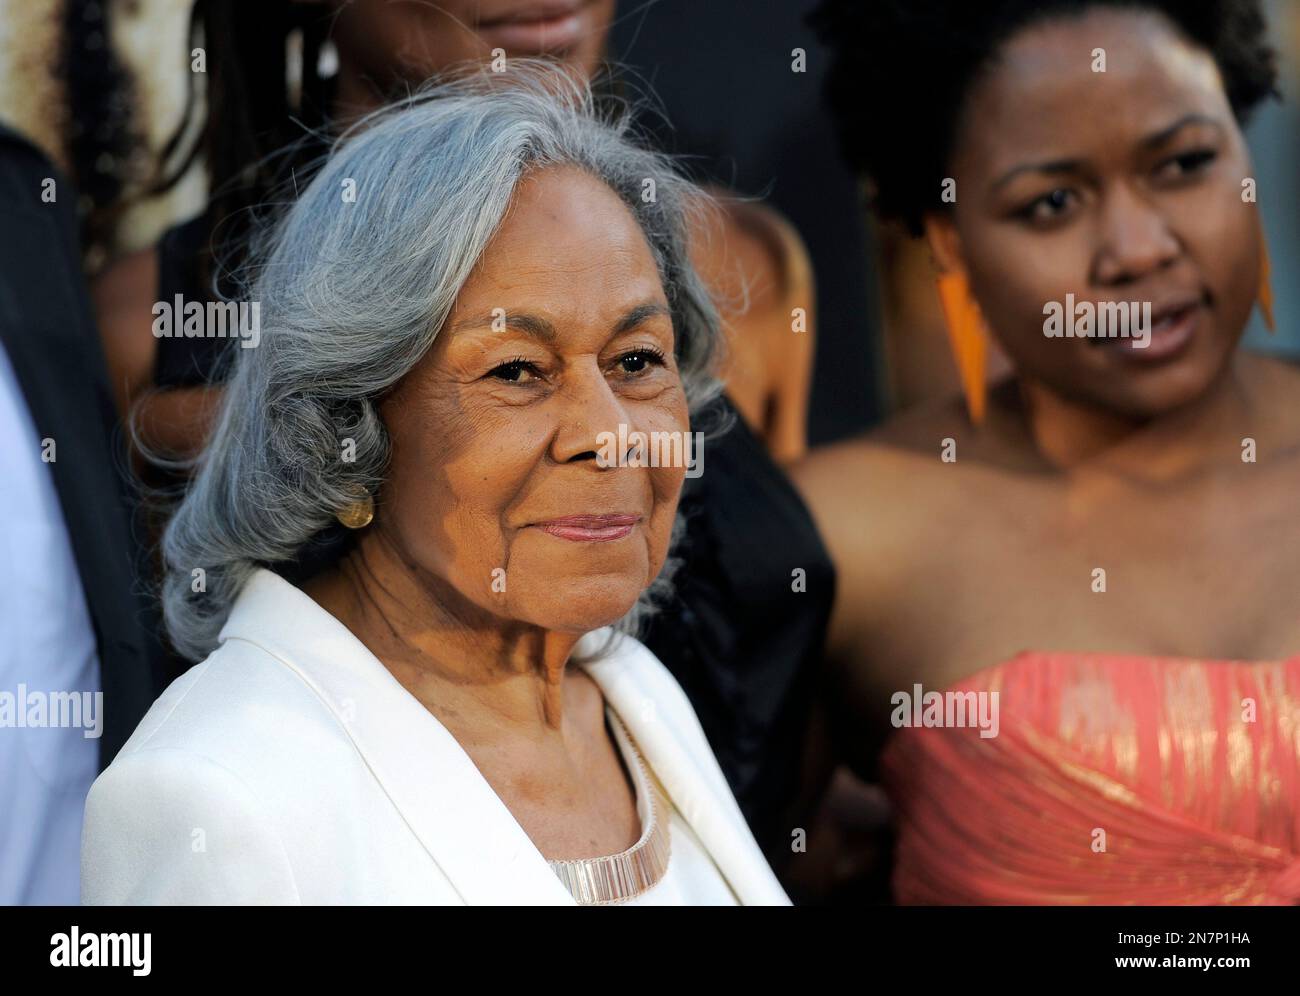 Rachel Robinson makes guest appearance at Dodger Stadium – Daily News